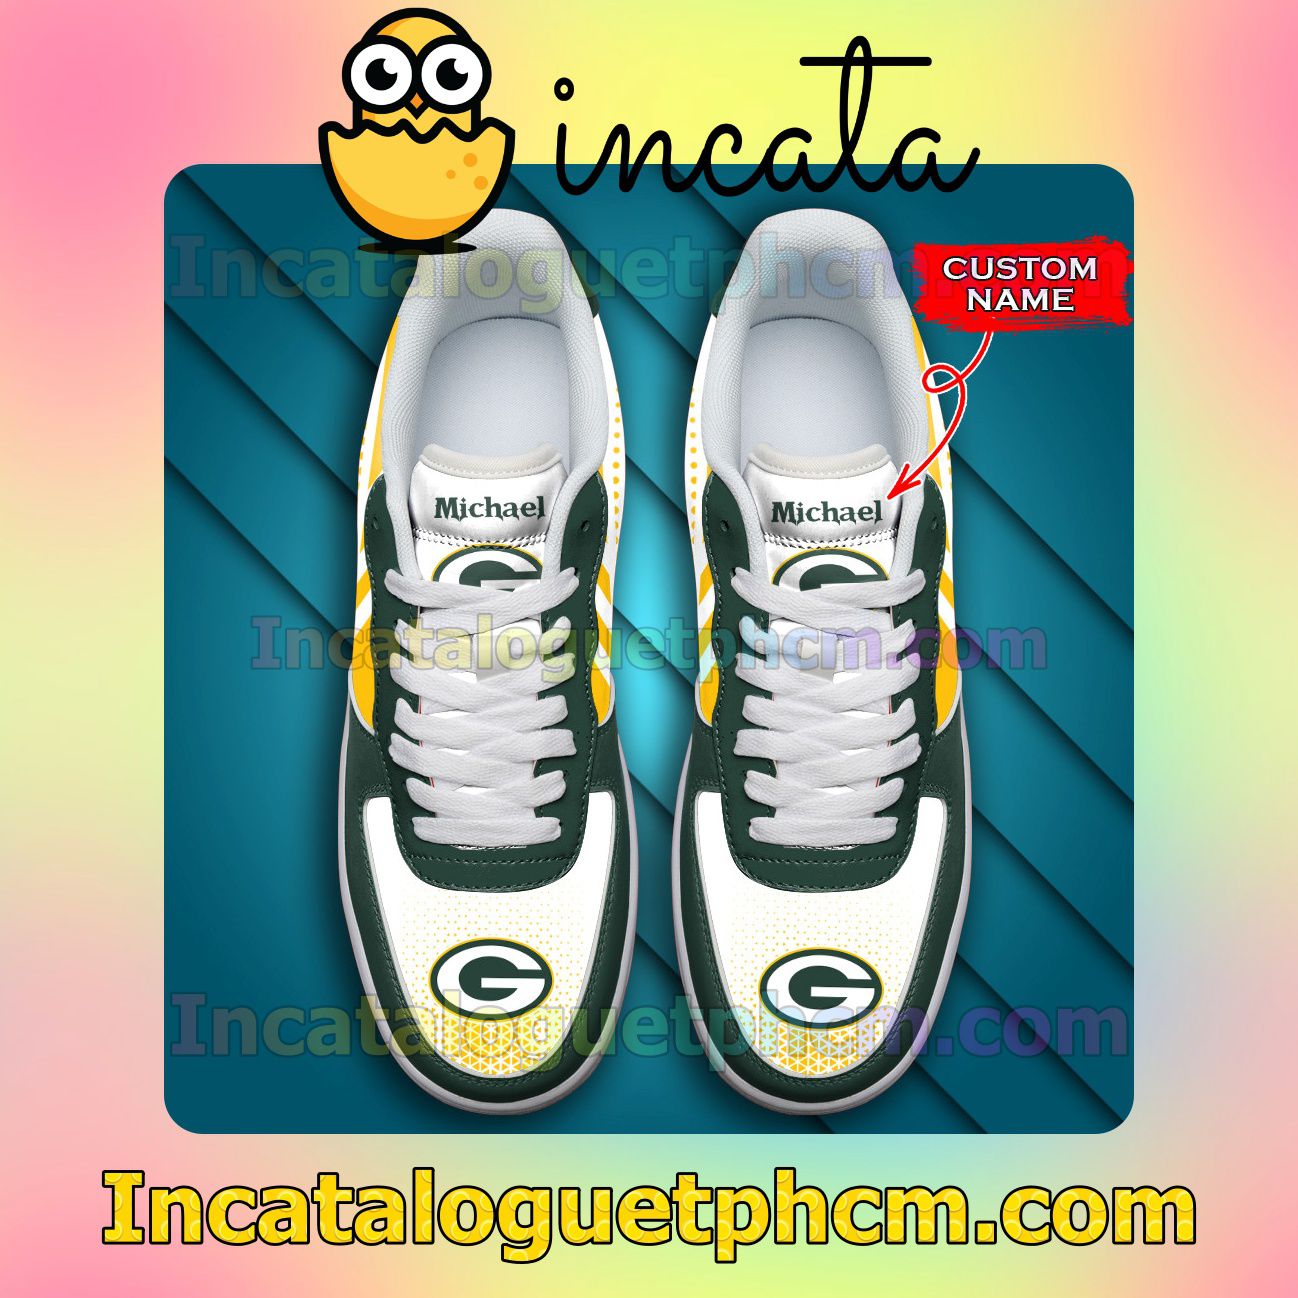 Awesome Personalized NFL Green Bay Packers Custom Name Nike Low Shoes Sneakers